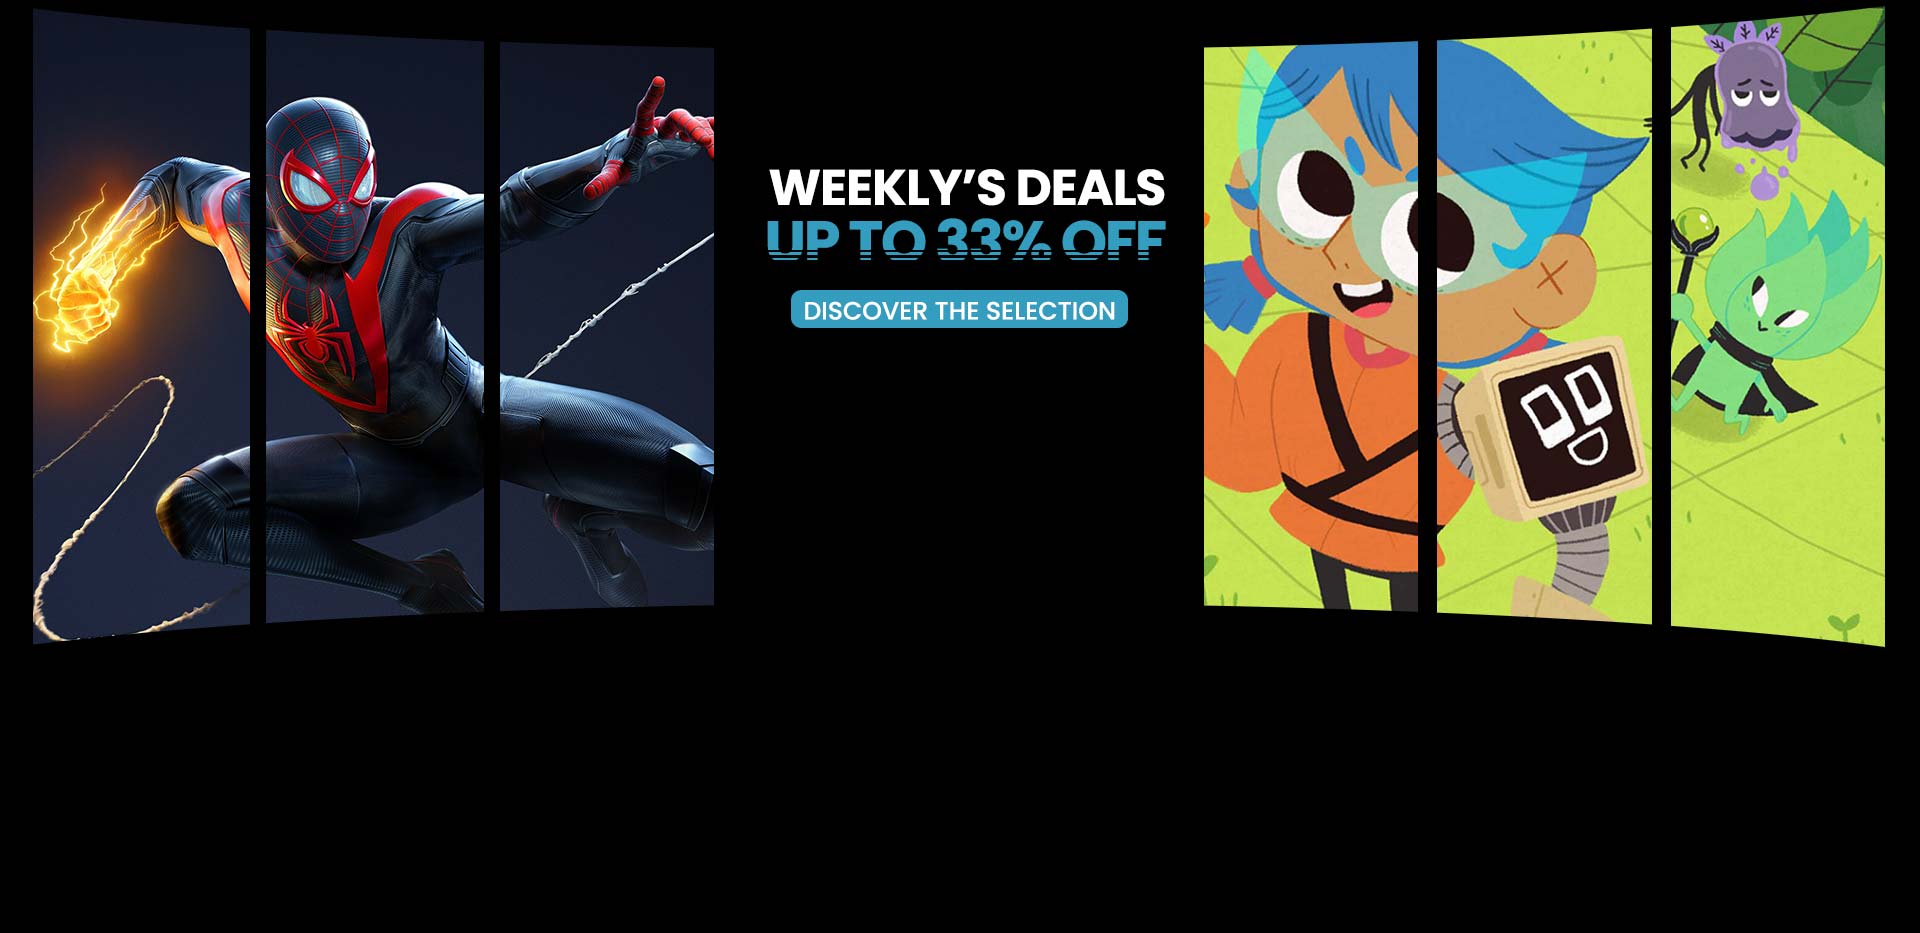 Carousel - Weekly Deals